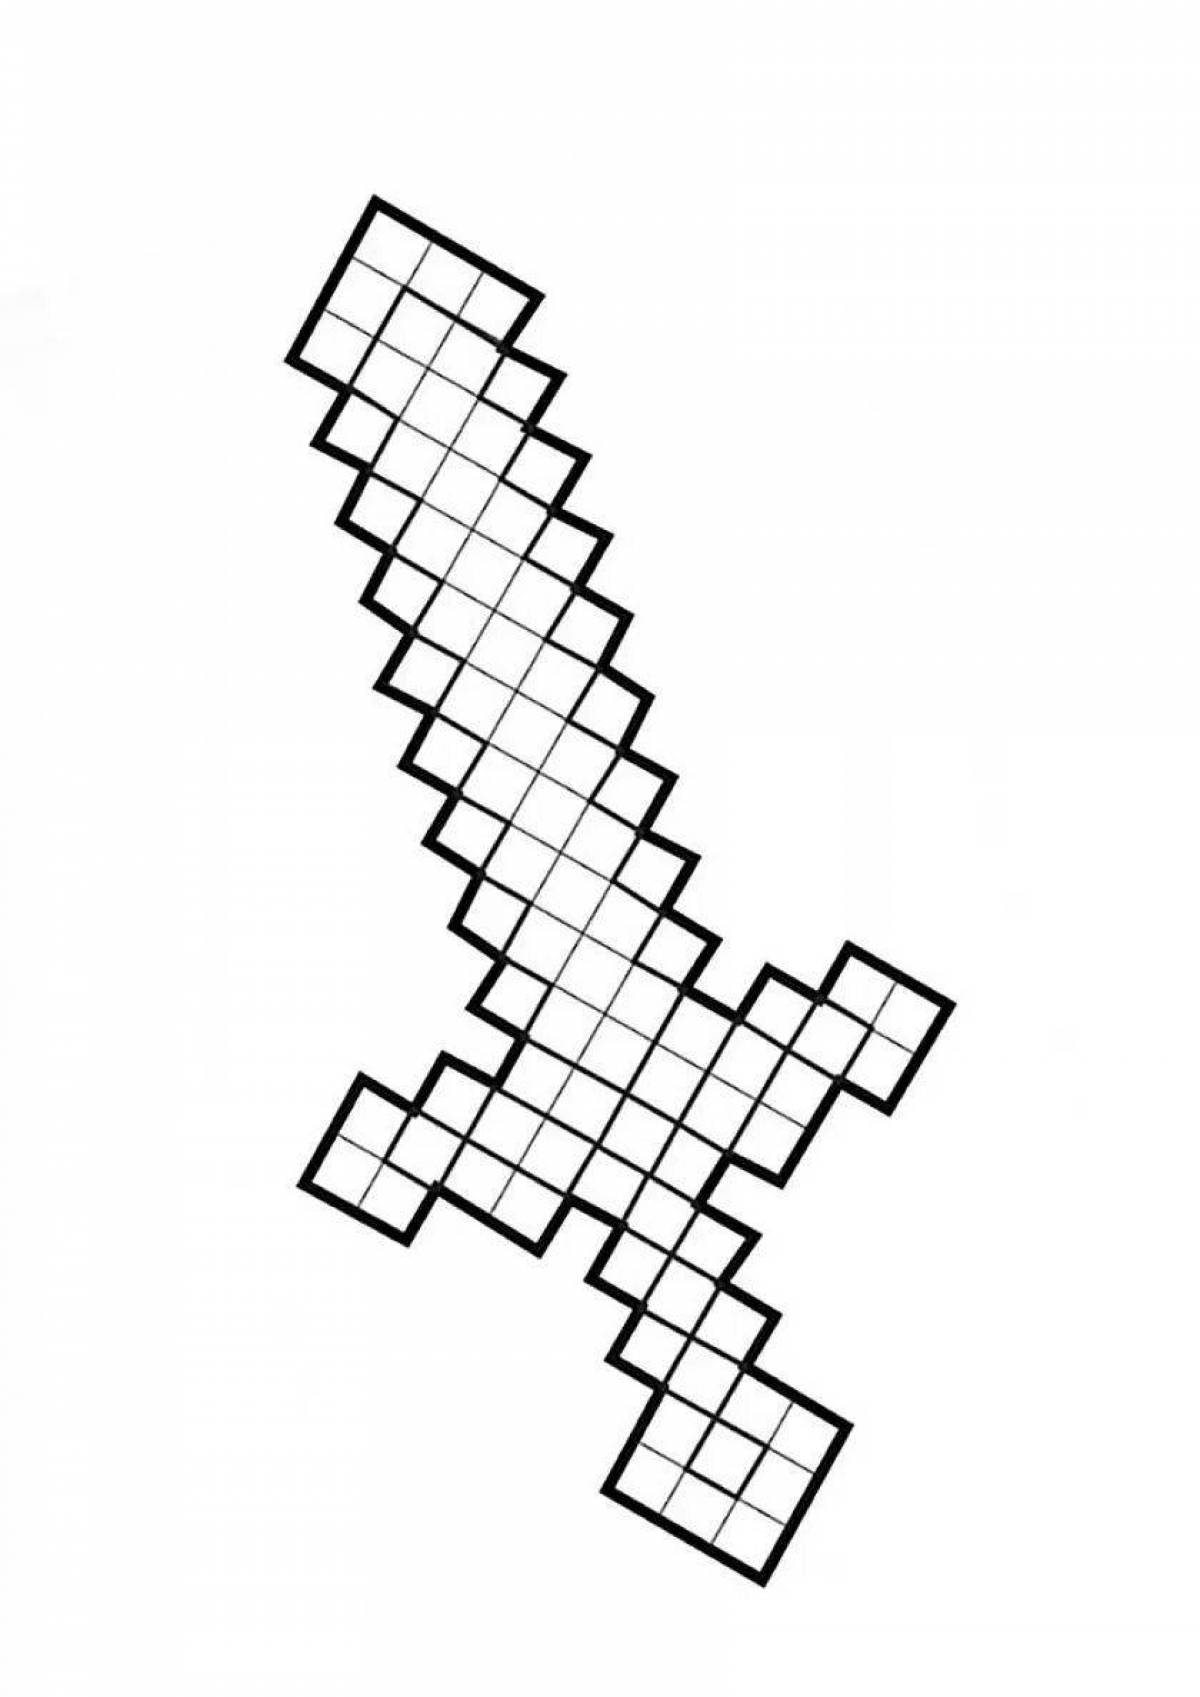 A fascinating minecraft diamond coloring page